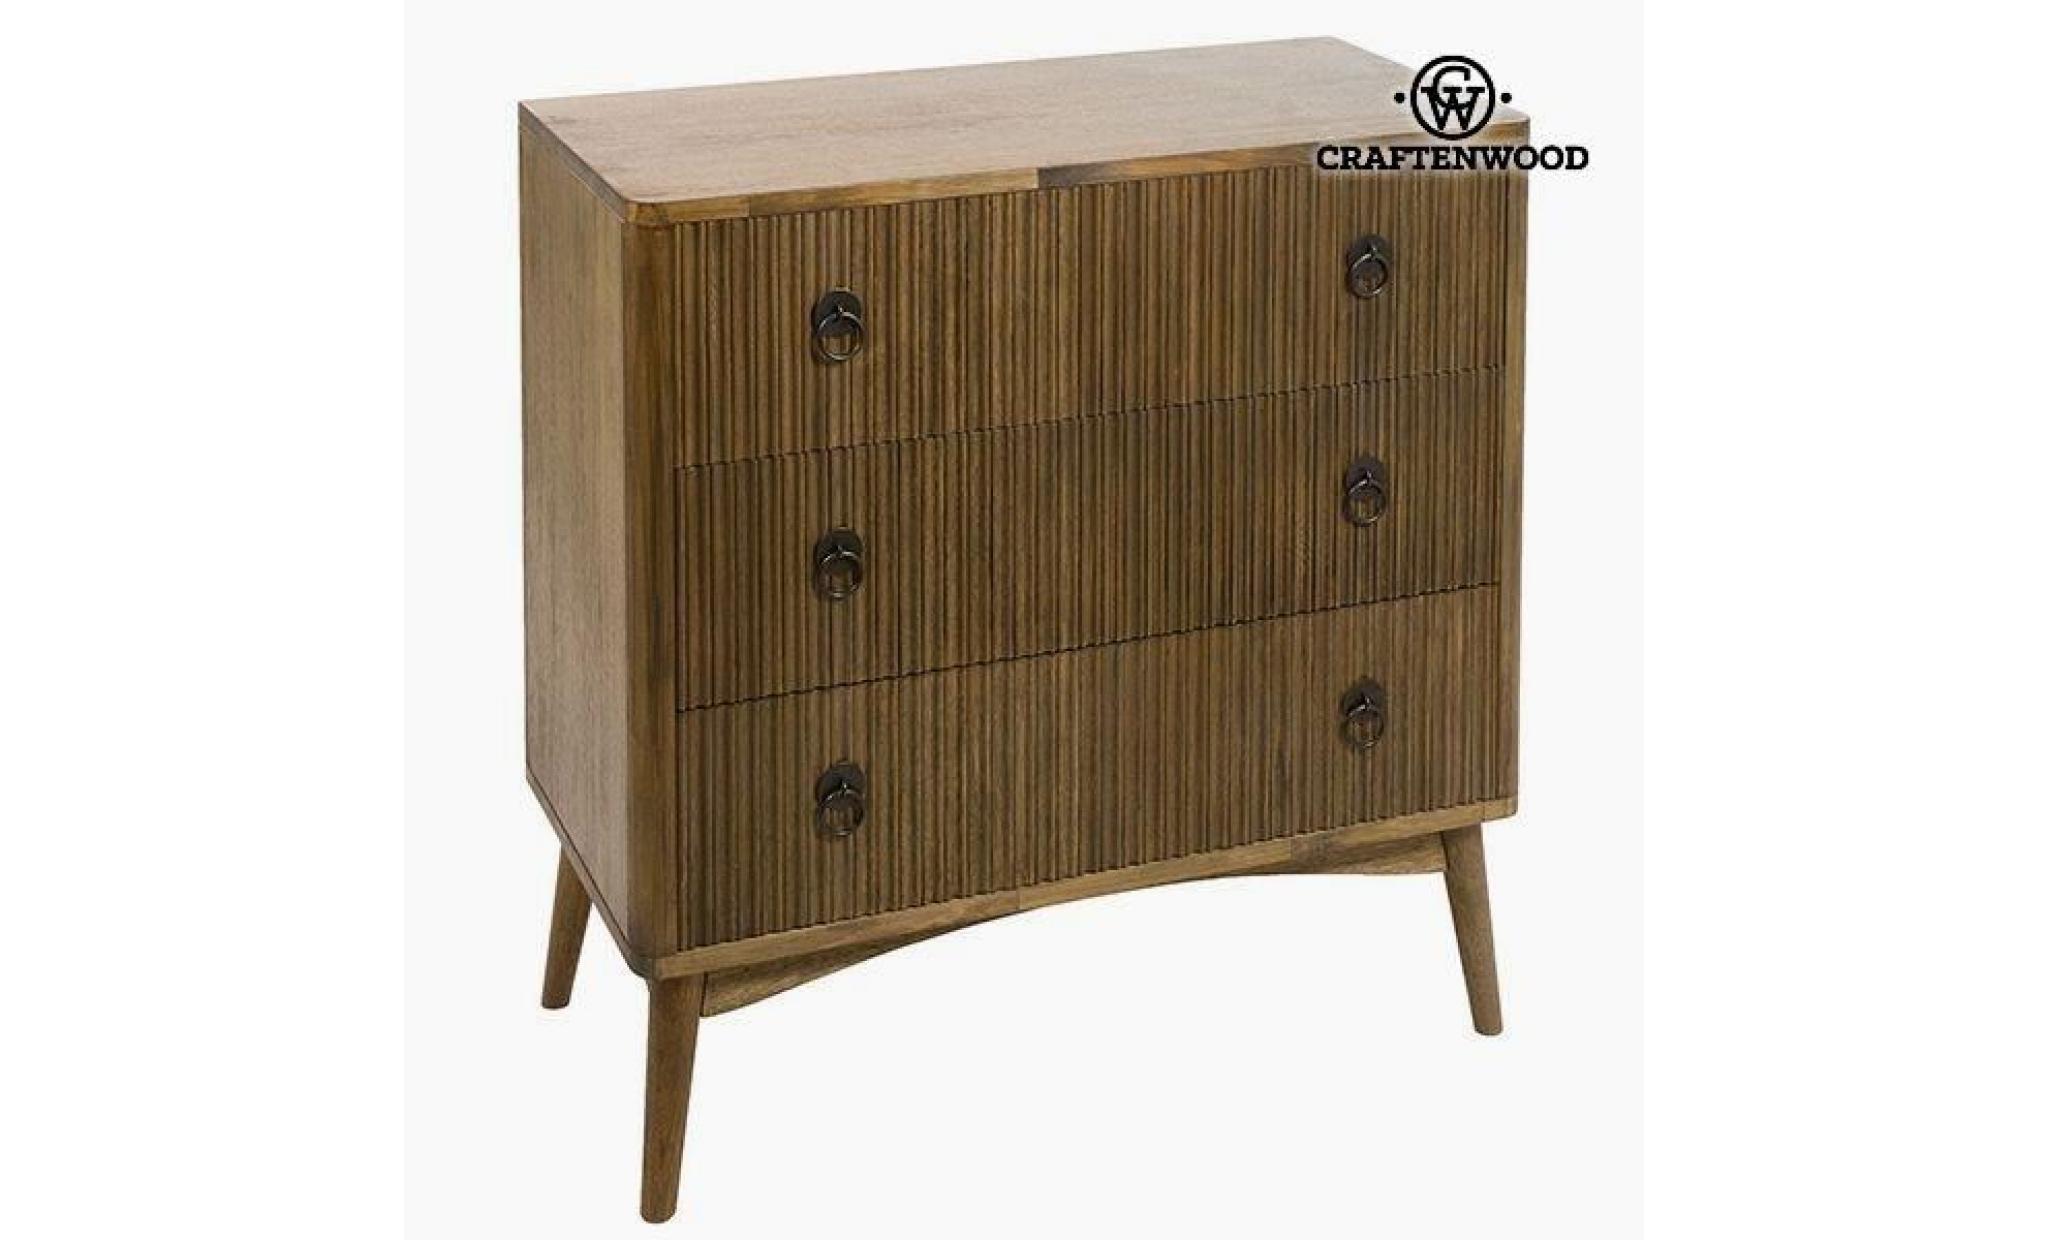 commode teck mdf marron (82 x 40 x 81,50 cm)   collection be yourself by craftenwood